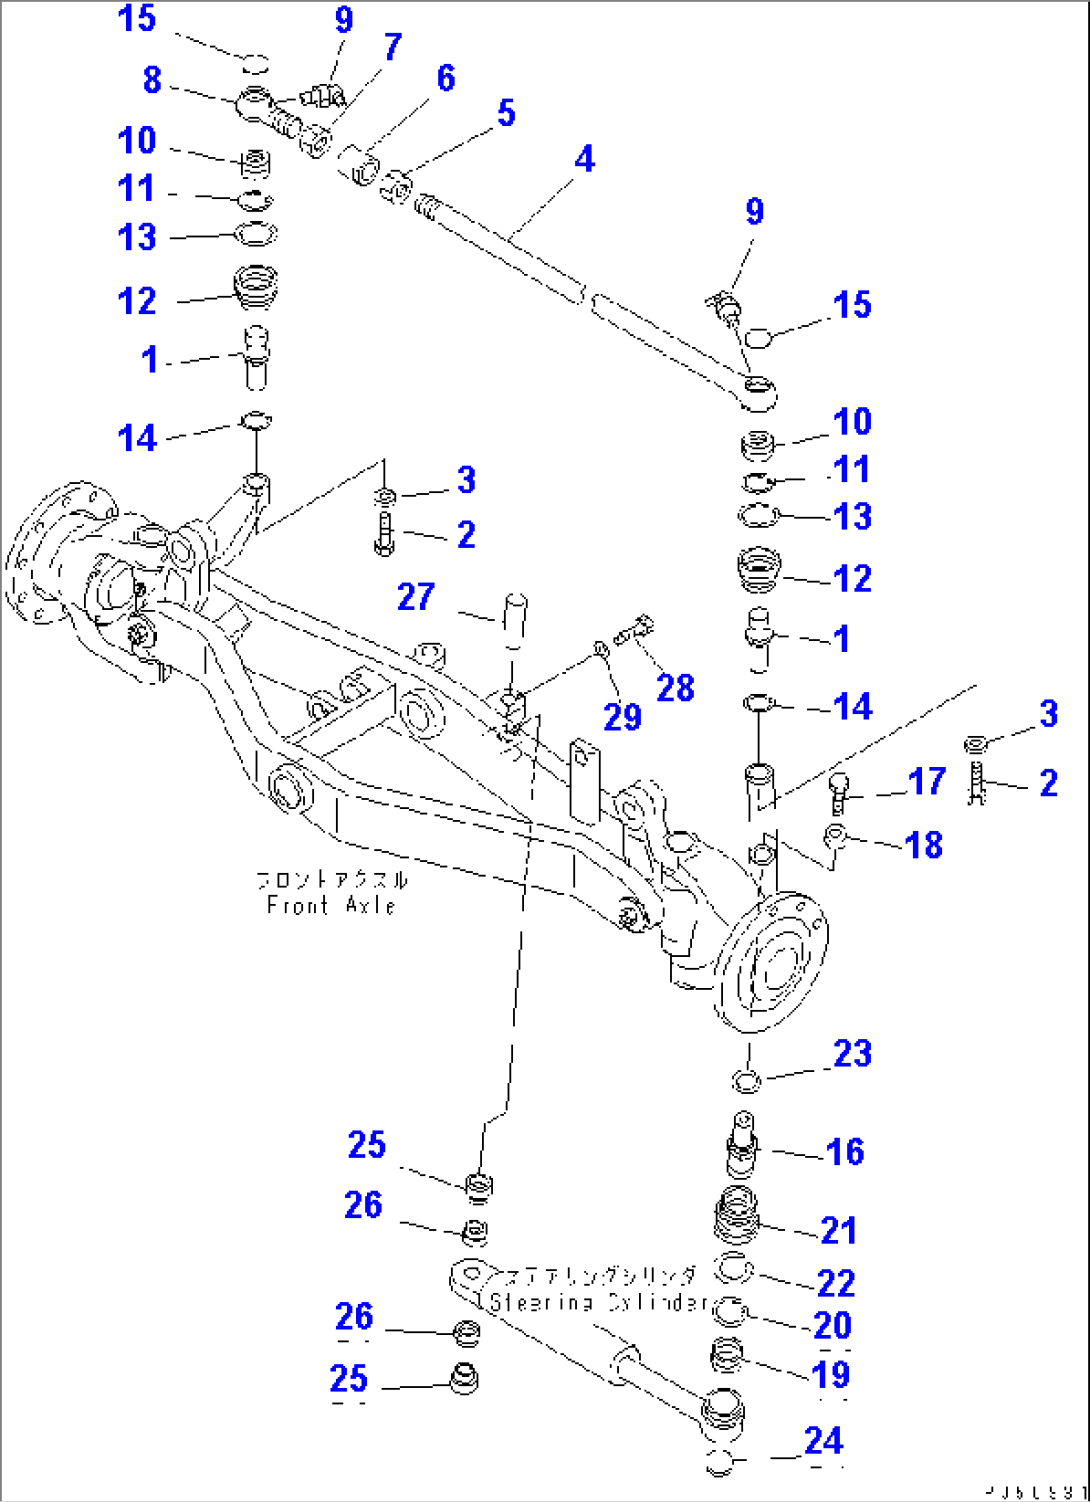 FRONT AXLE (3/3)